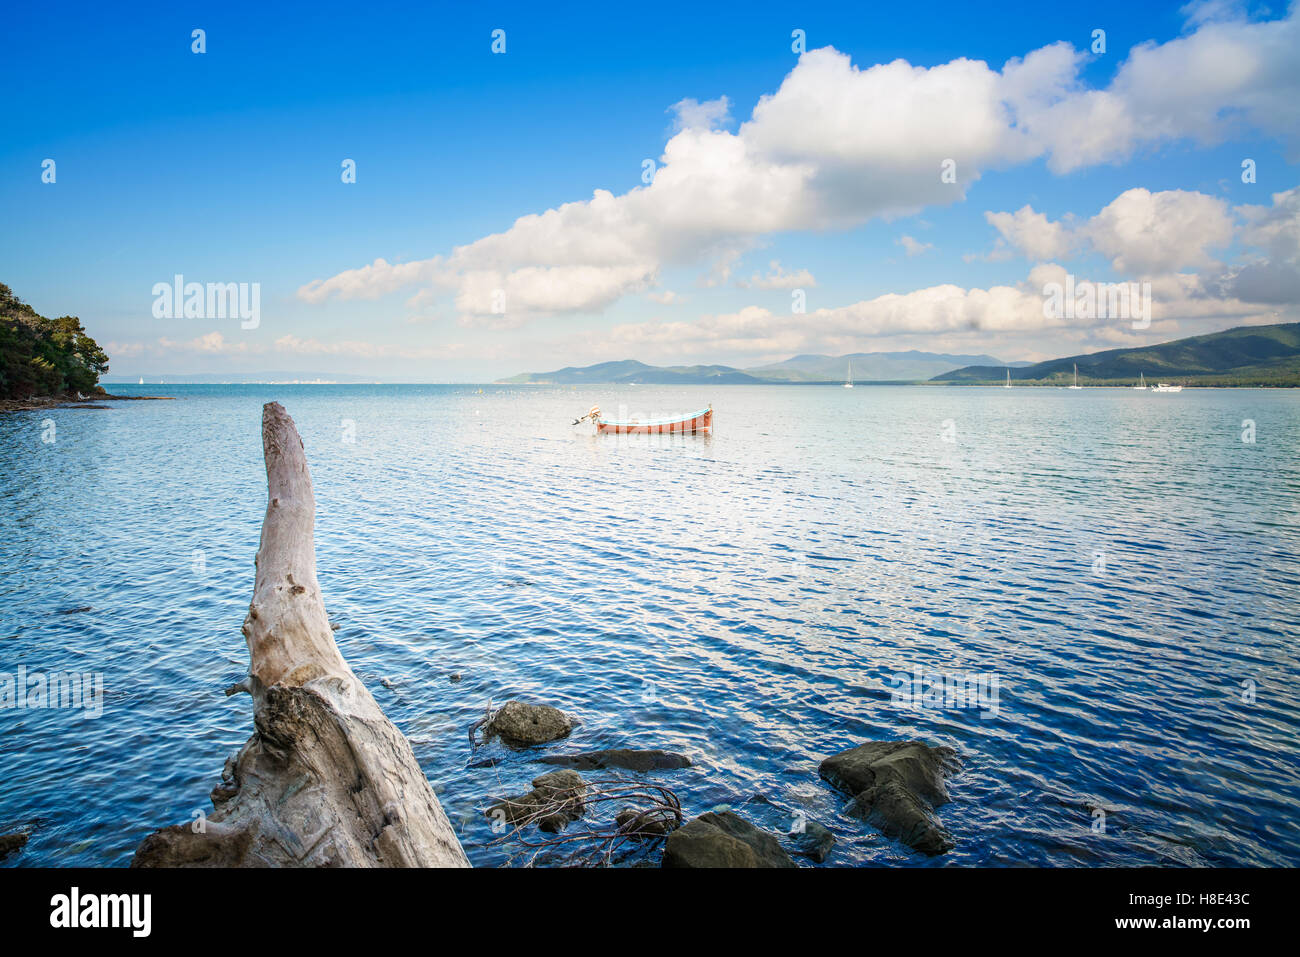 Small wooden boat and tree trunk in a sea bay on sunset. Punta Ala, Tuscany, Italy Stock Photo